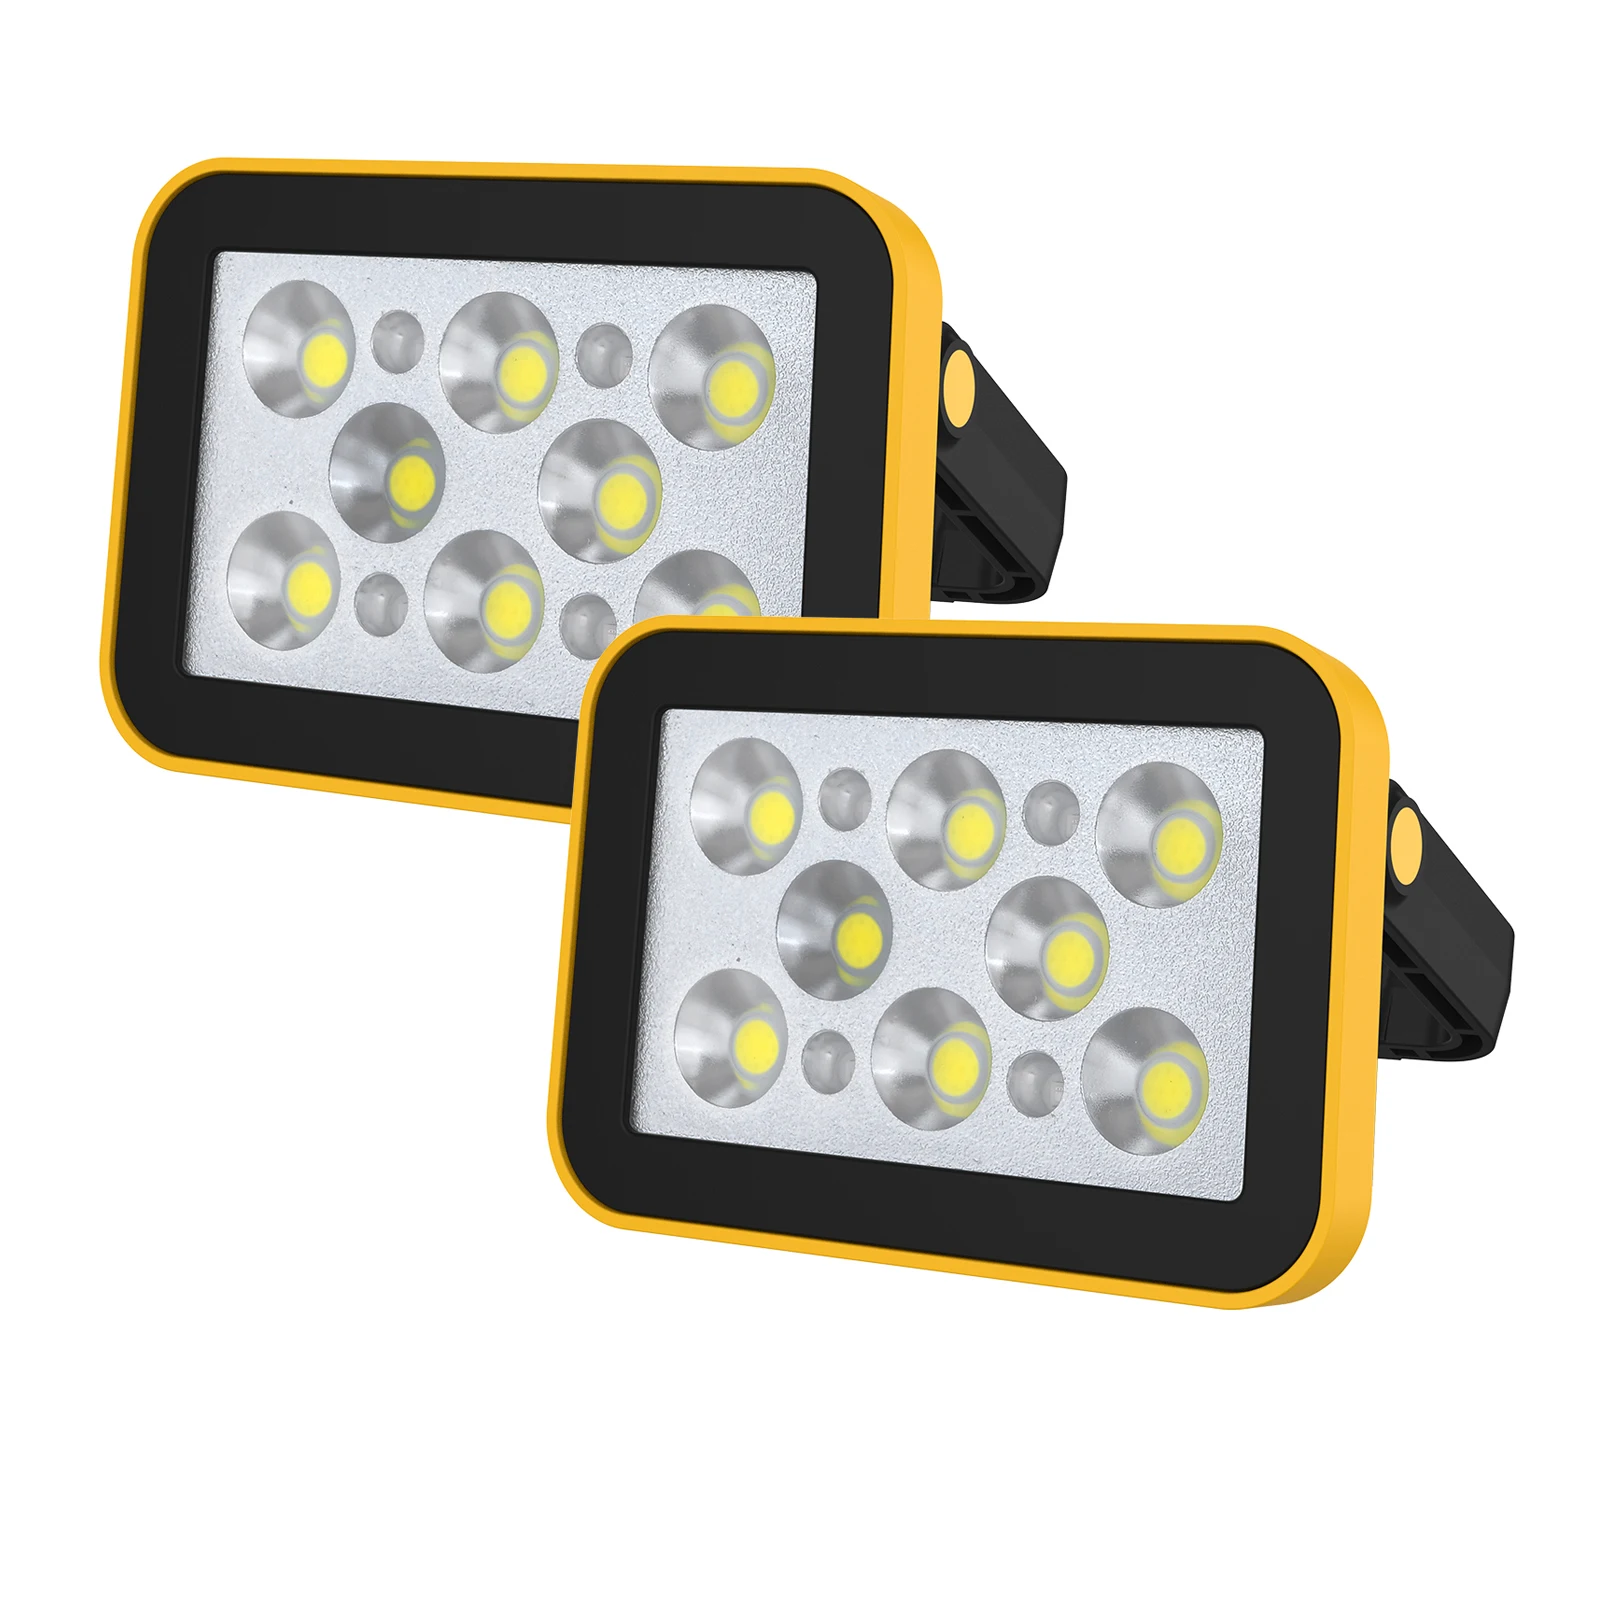 

2pcs LED Portable Work Light Outdoor Camping Emergency Powerful Flood Light 4 Modes Rechargeable Working Fishing COB Flashlight